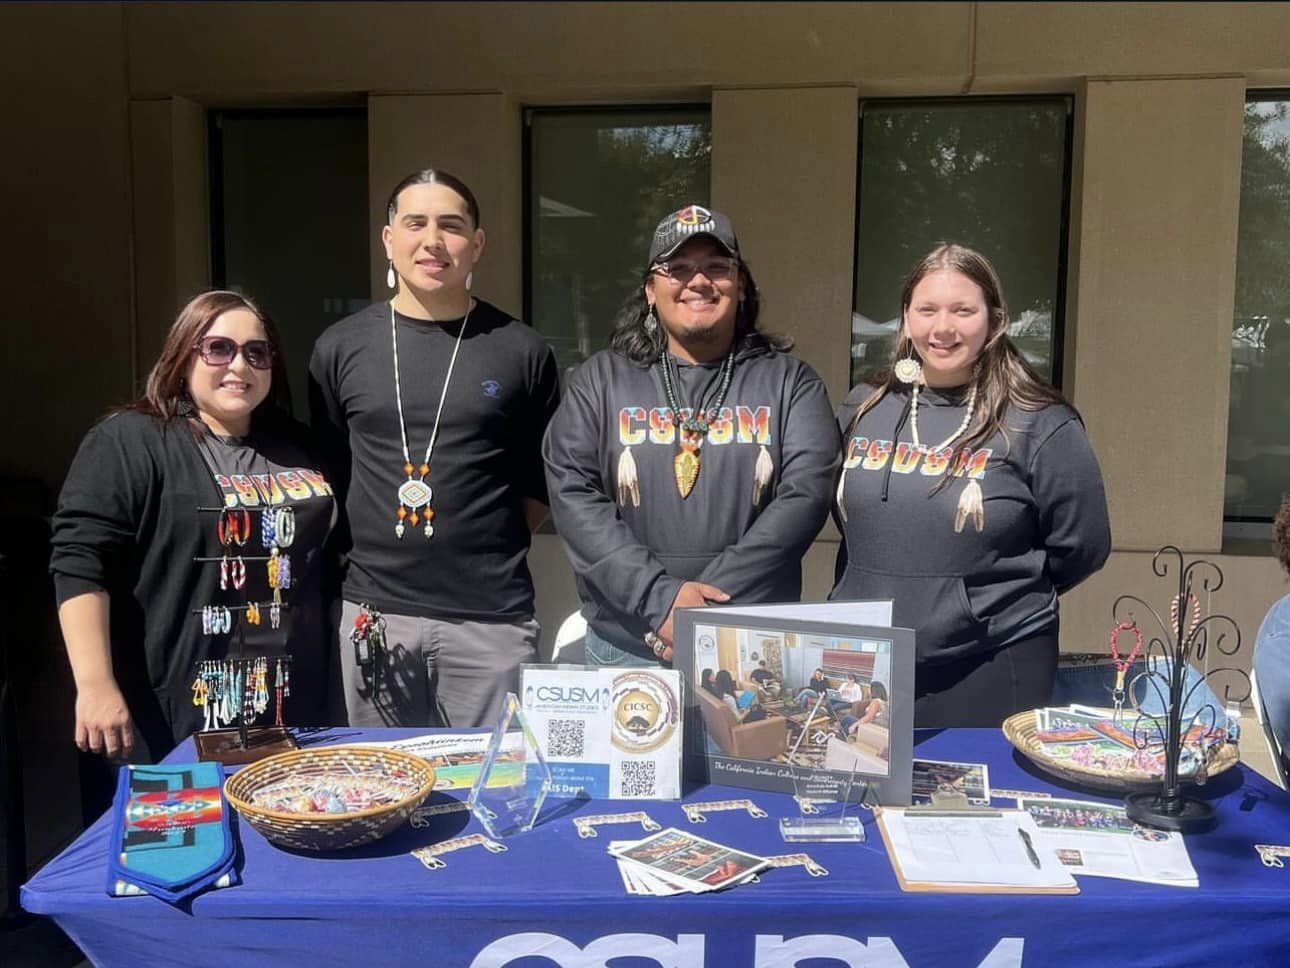 Four people standing outside behind a table with a blue tablecloth and a variety of items showcasing AI/AN presence on campus, including jewelry, a Pendleton stole, stickers, pamphlets, a sign-up sheet, and more